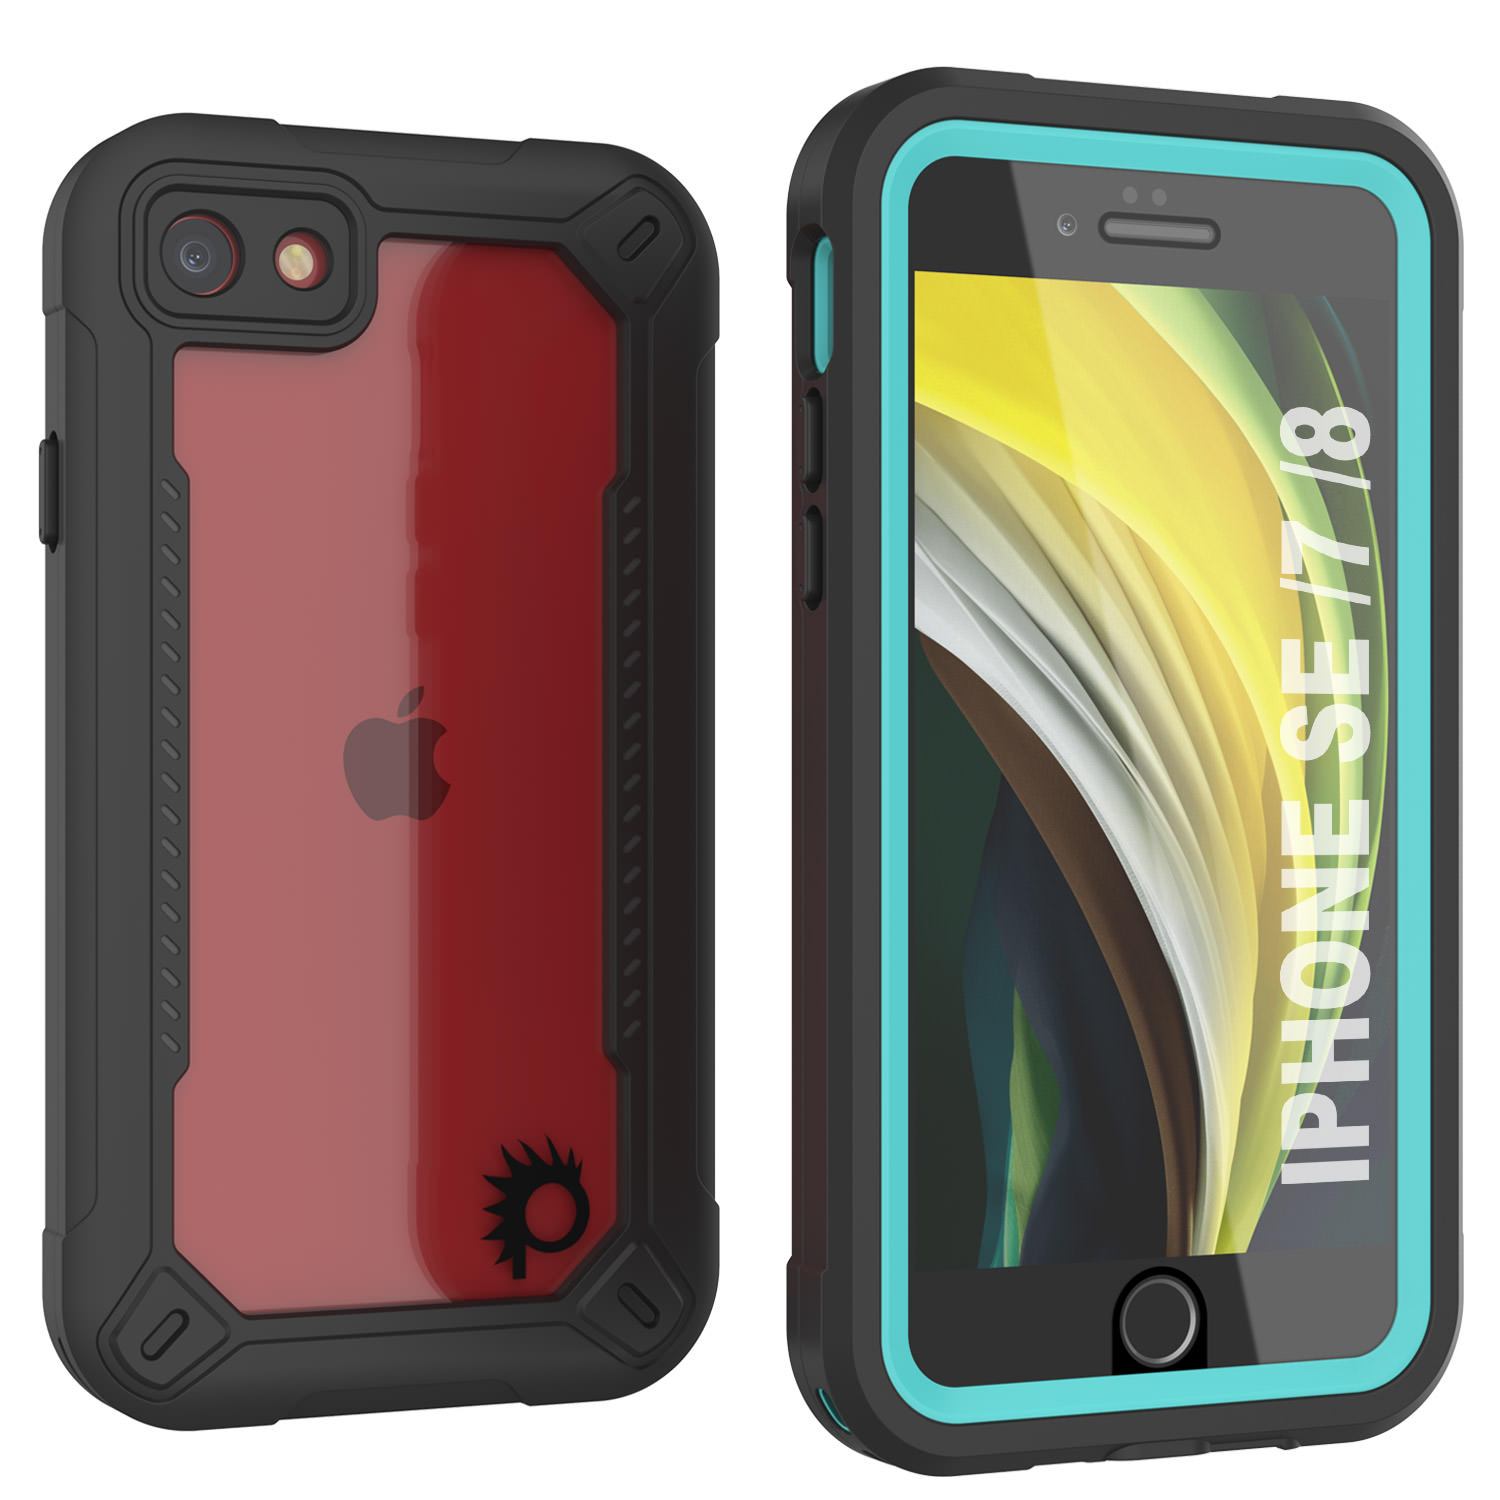 iPhone 8 Waterproof IP68 Case, Punkcase [teal]  [Maximus Series] [Slim Fit] [IP68 Certified] [Shockresistant] Clear Armor Cover with Screen Protector | Ultimate Protection (Color in image: teal)